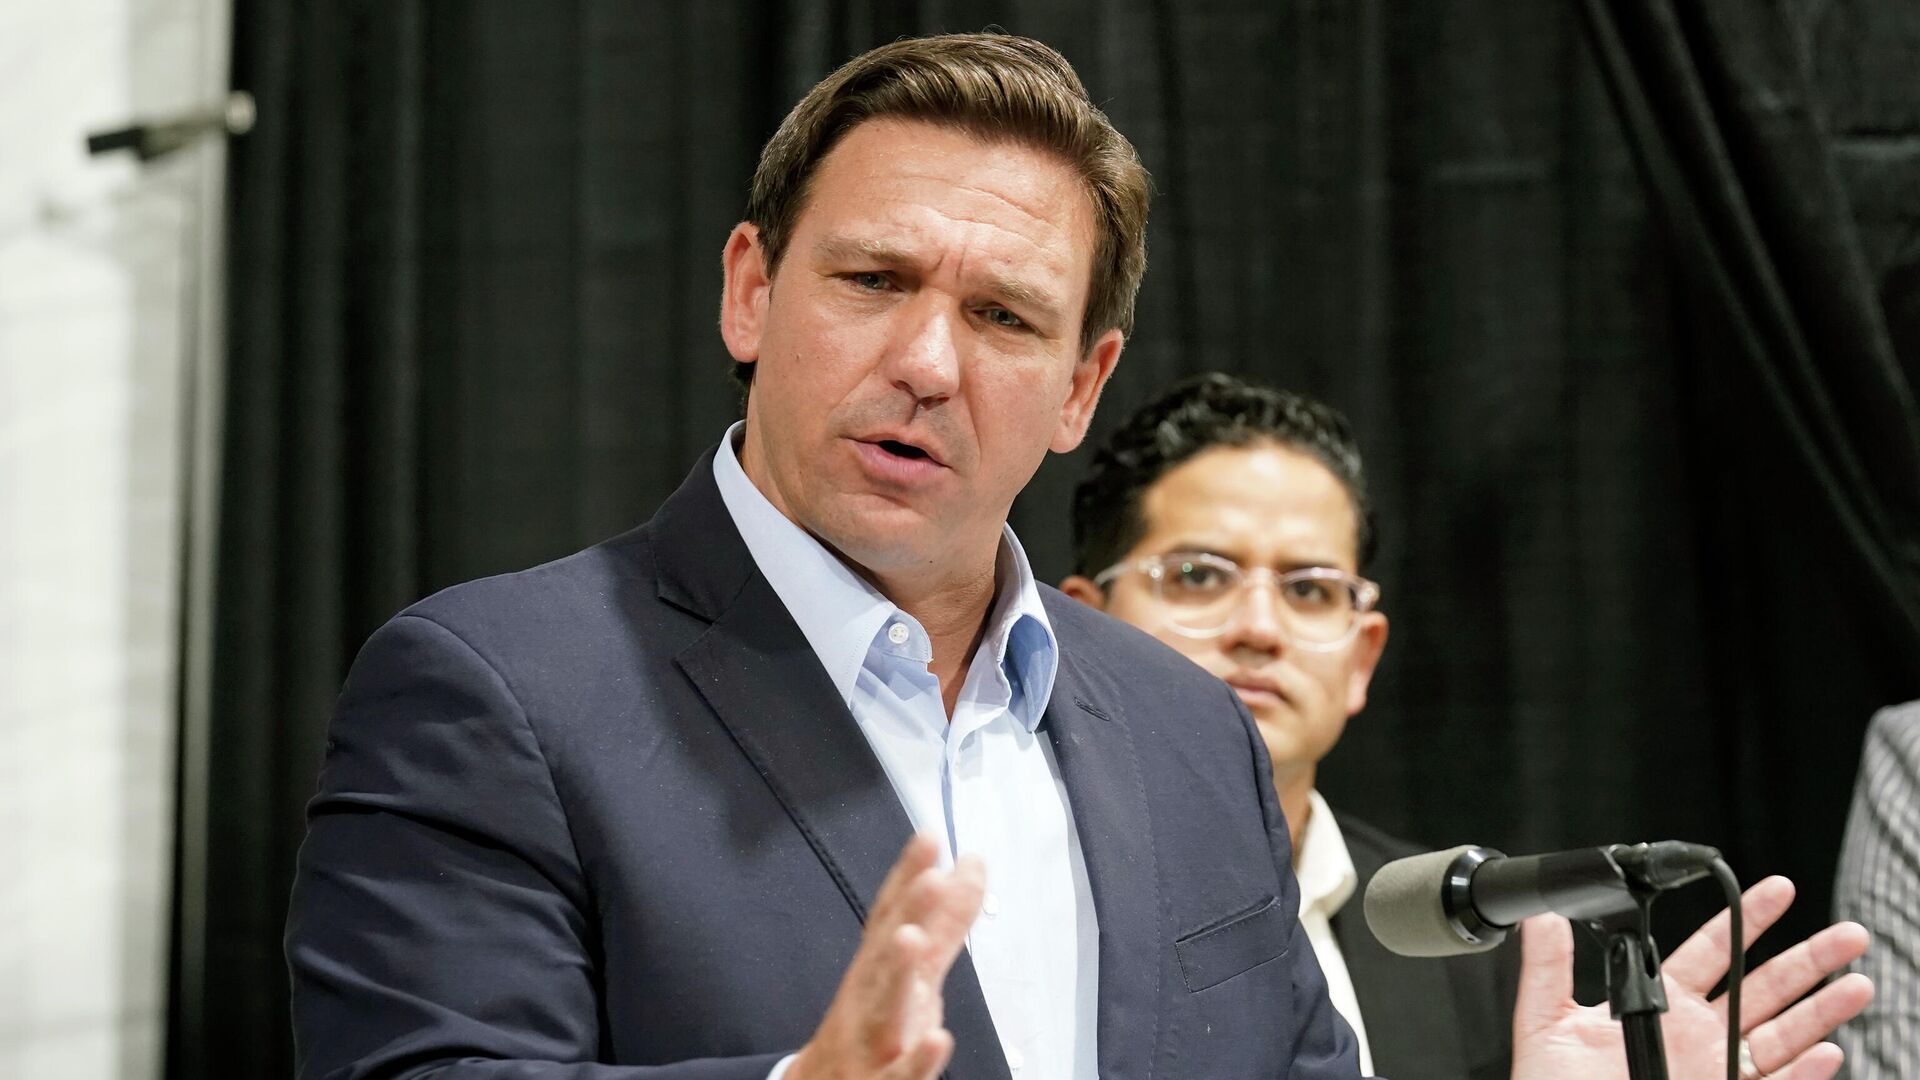  In this Wednesday, Aug. 18, 2021 file photo, Florida Governor Ron DeSantis speaks at the opening of a monoclonal antibody site in Pembroke Pines, Fla.  - Sputnik International, 1920, 28.03.2022